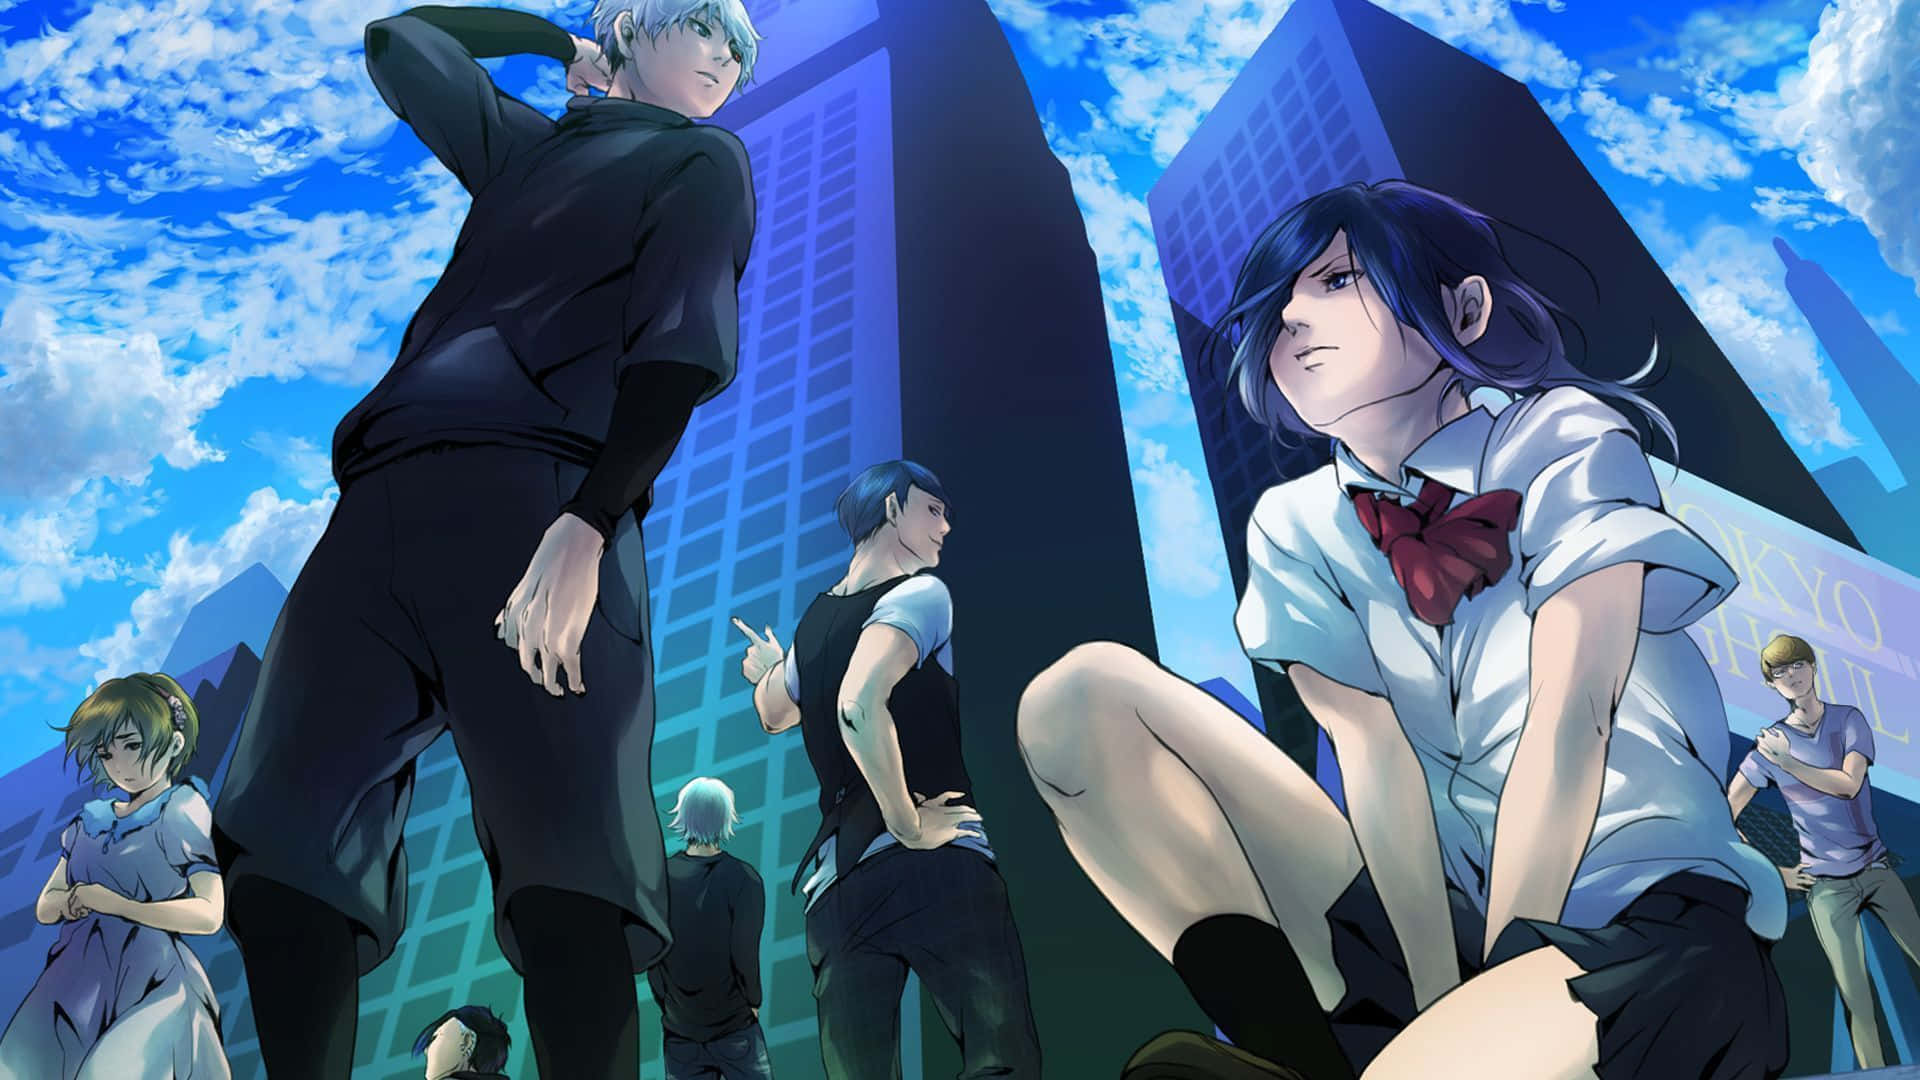 Tokyo Ghoul Opening 01 - Unravel by TK from Ling Tosite Sigure by ANIME OST  | ReverbNation